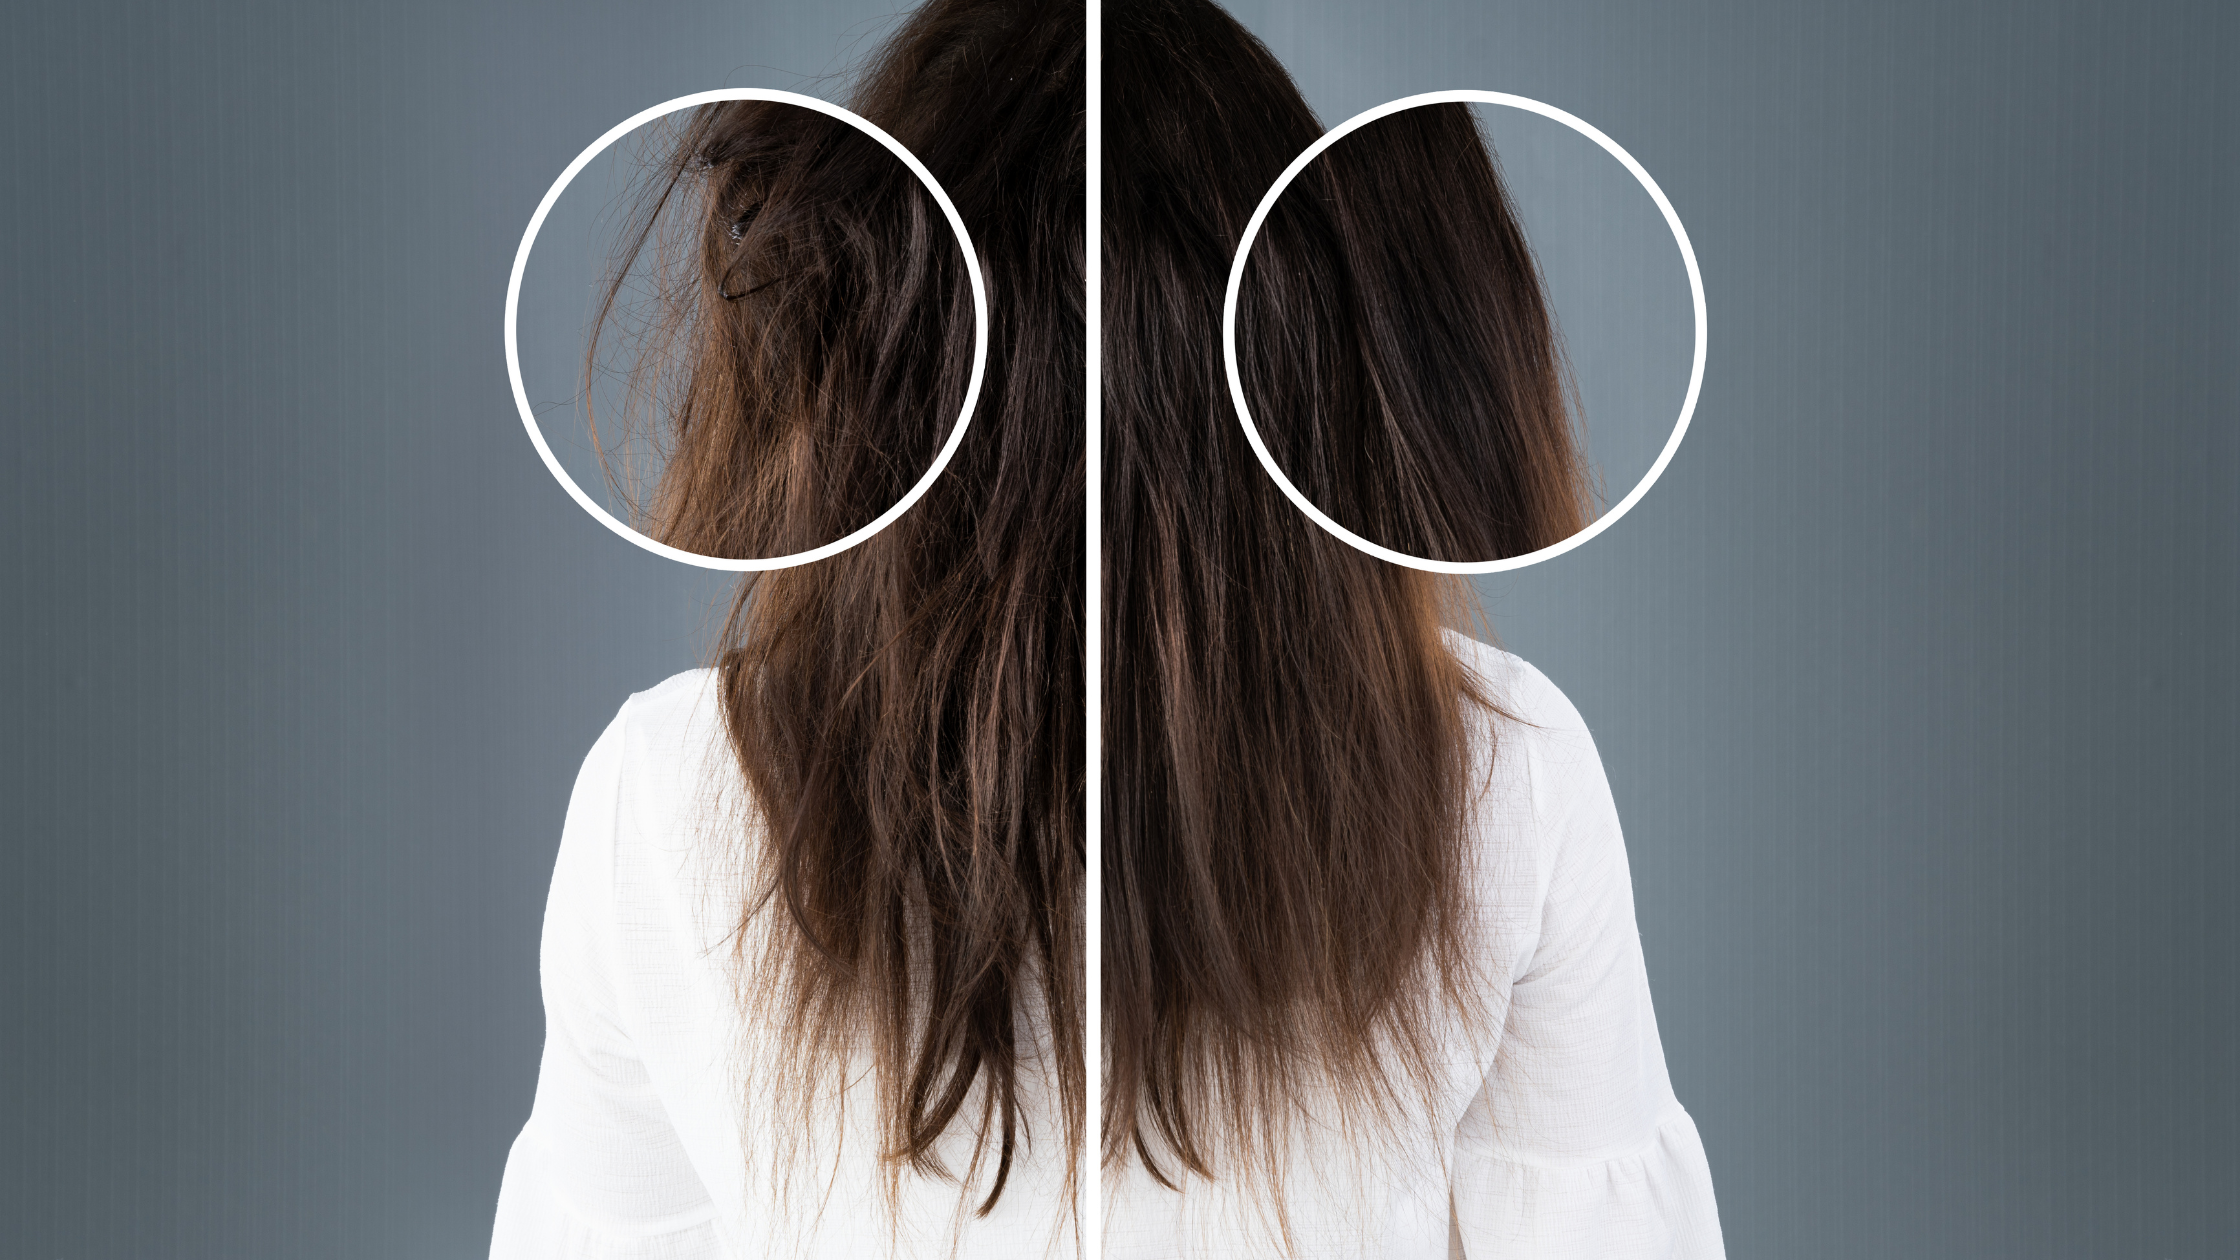 Why Is Perimenopause Affecting My Hair?